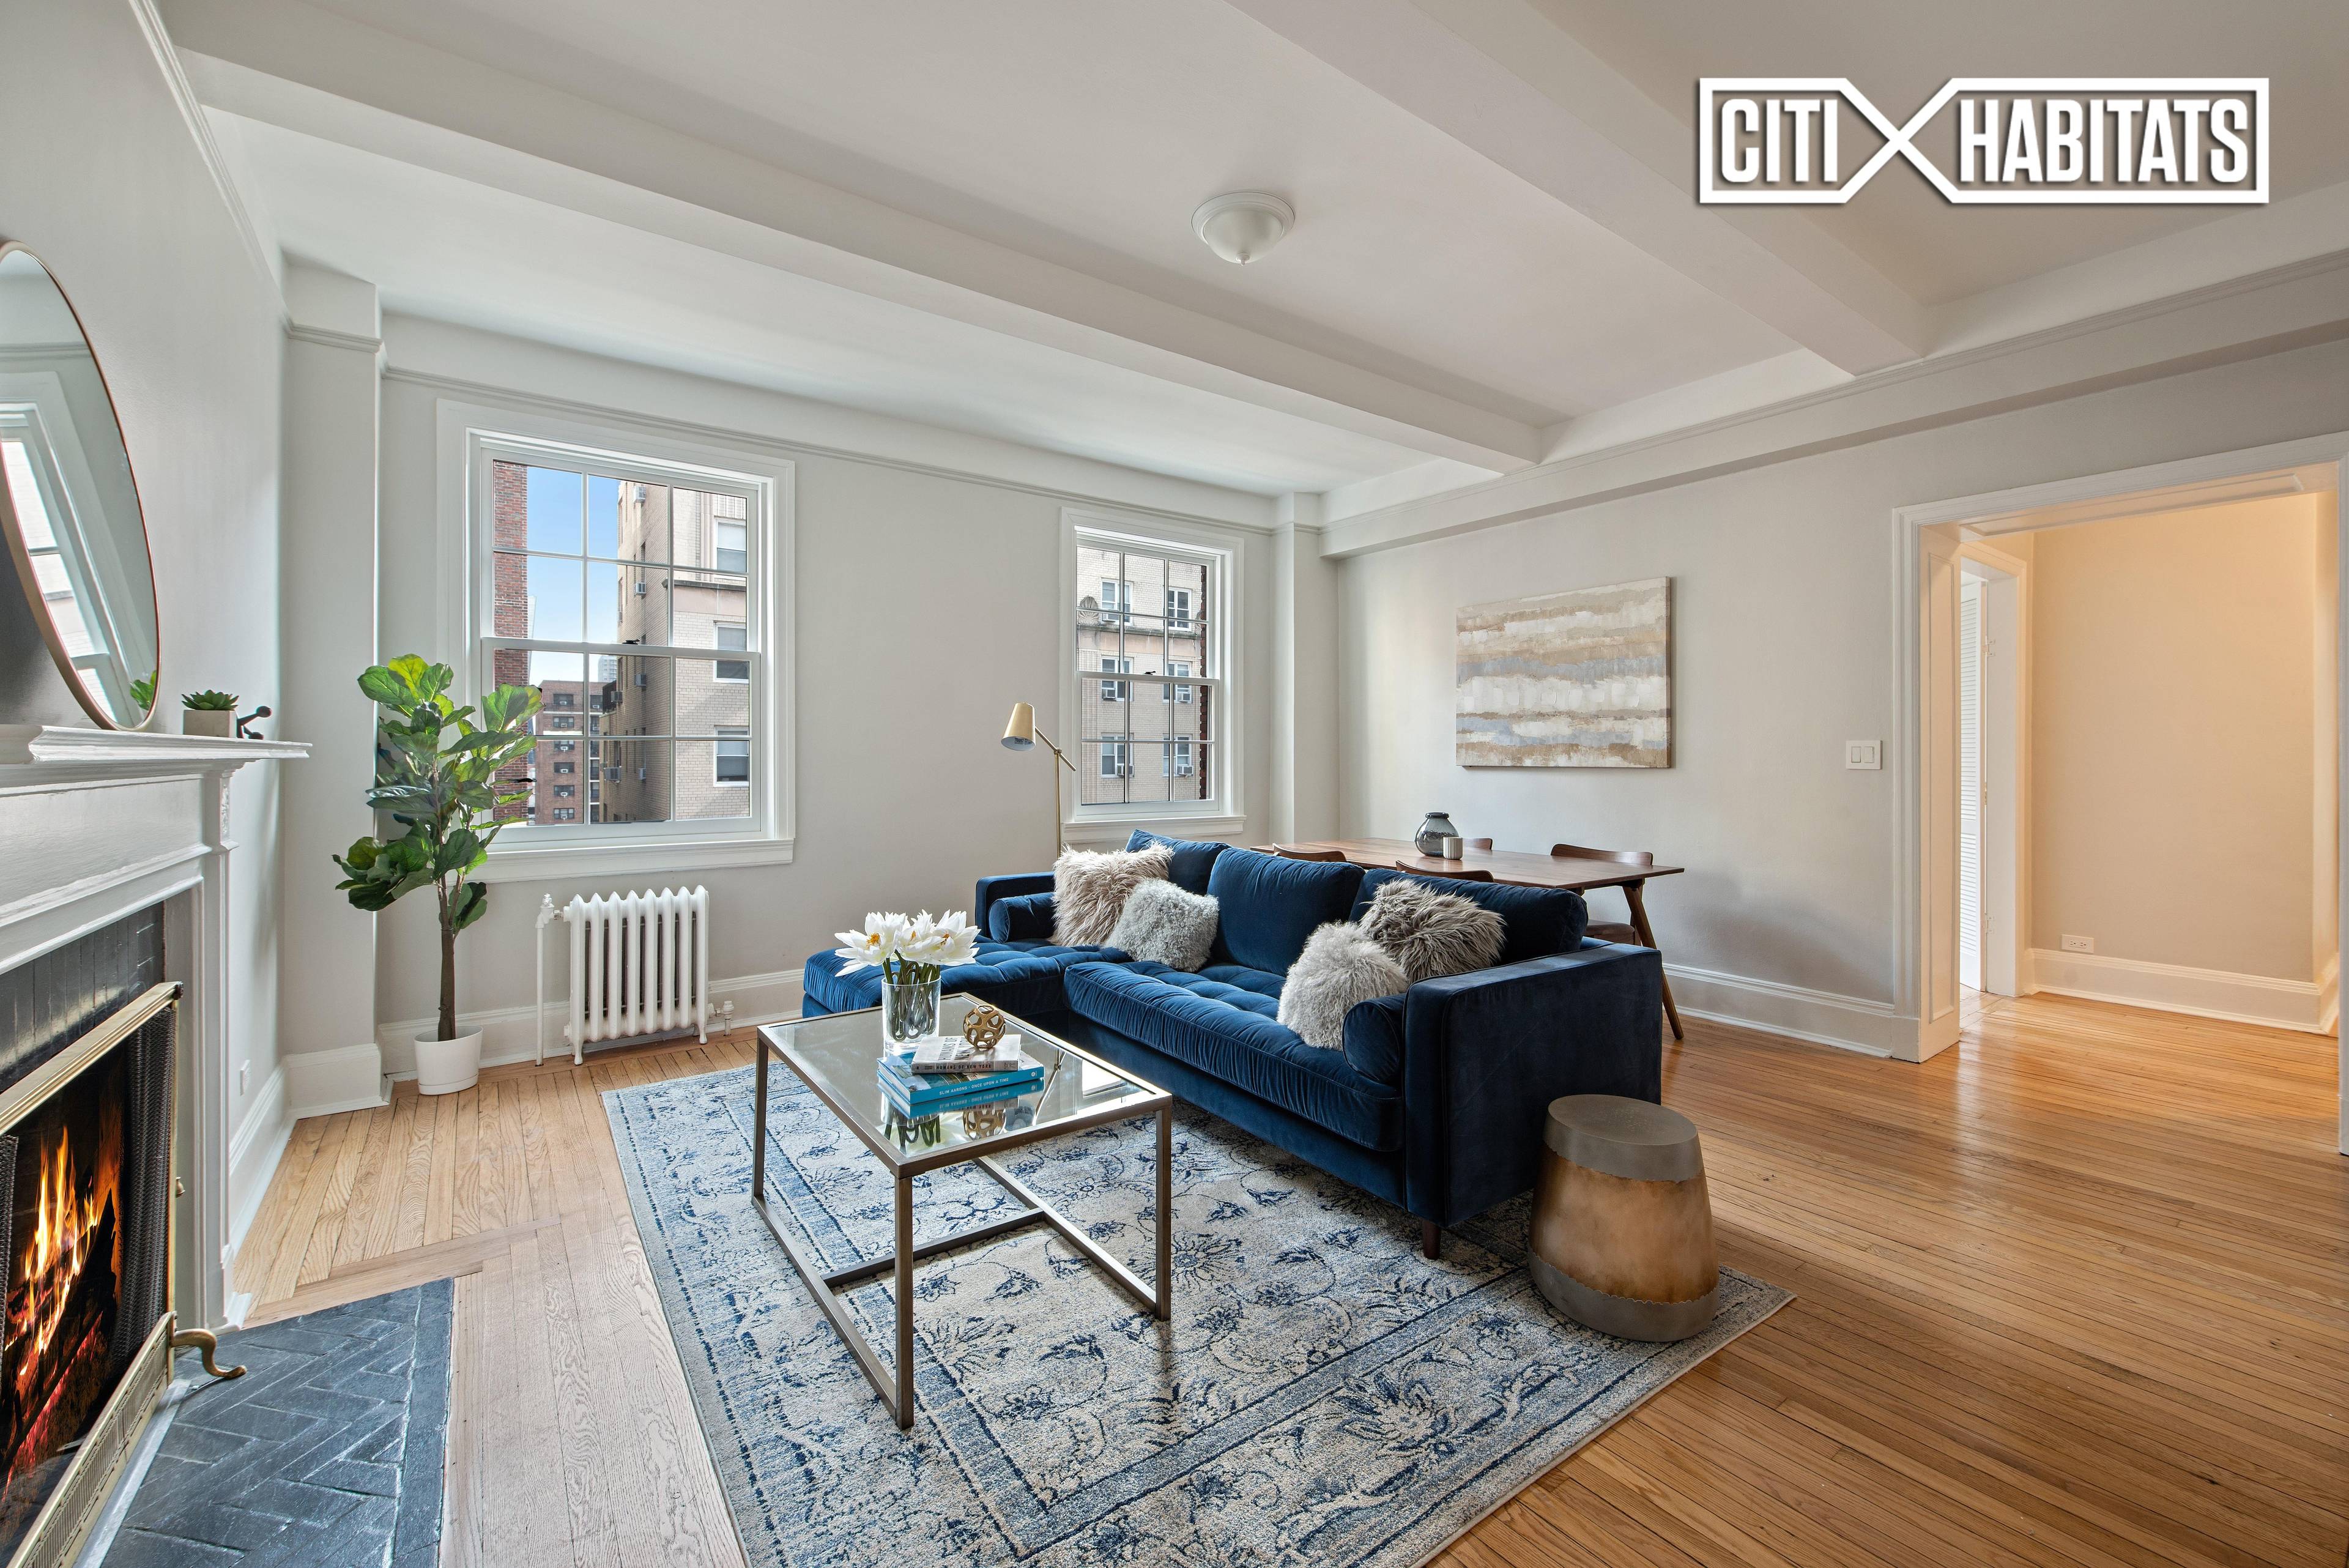 This bright and newly renovated pre war two bedroom in Murray Hill was built in 1923, and provides plenty of historic charm.